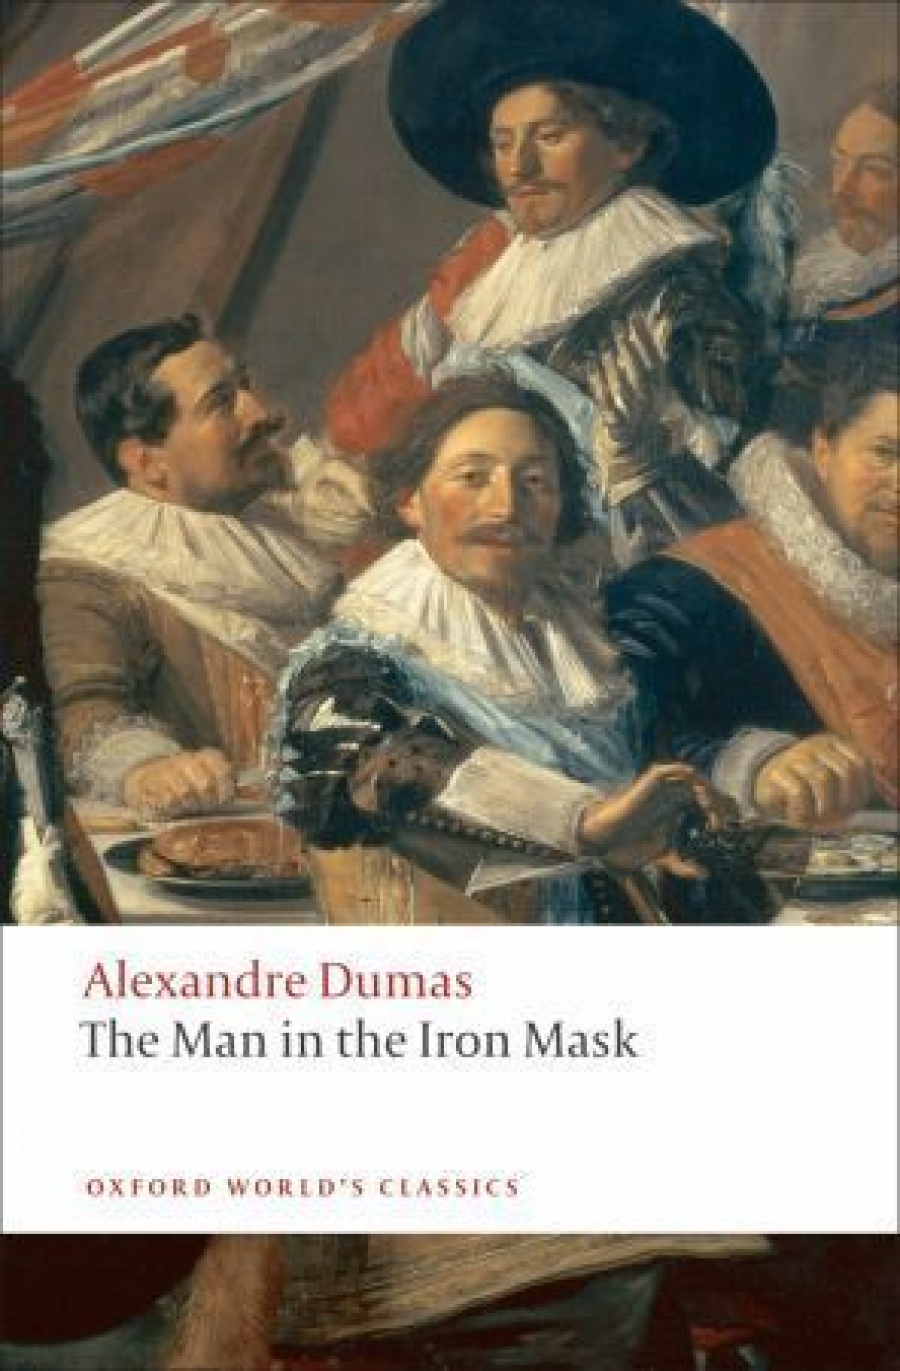 Alexandre Dumas, (pere) The Man in the Iron Mask 